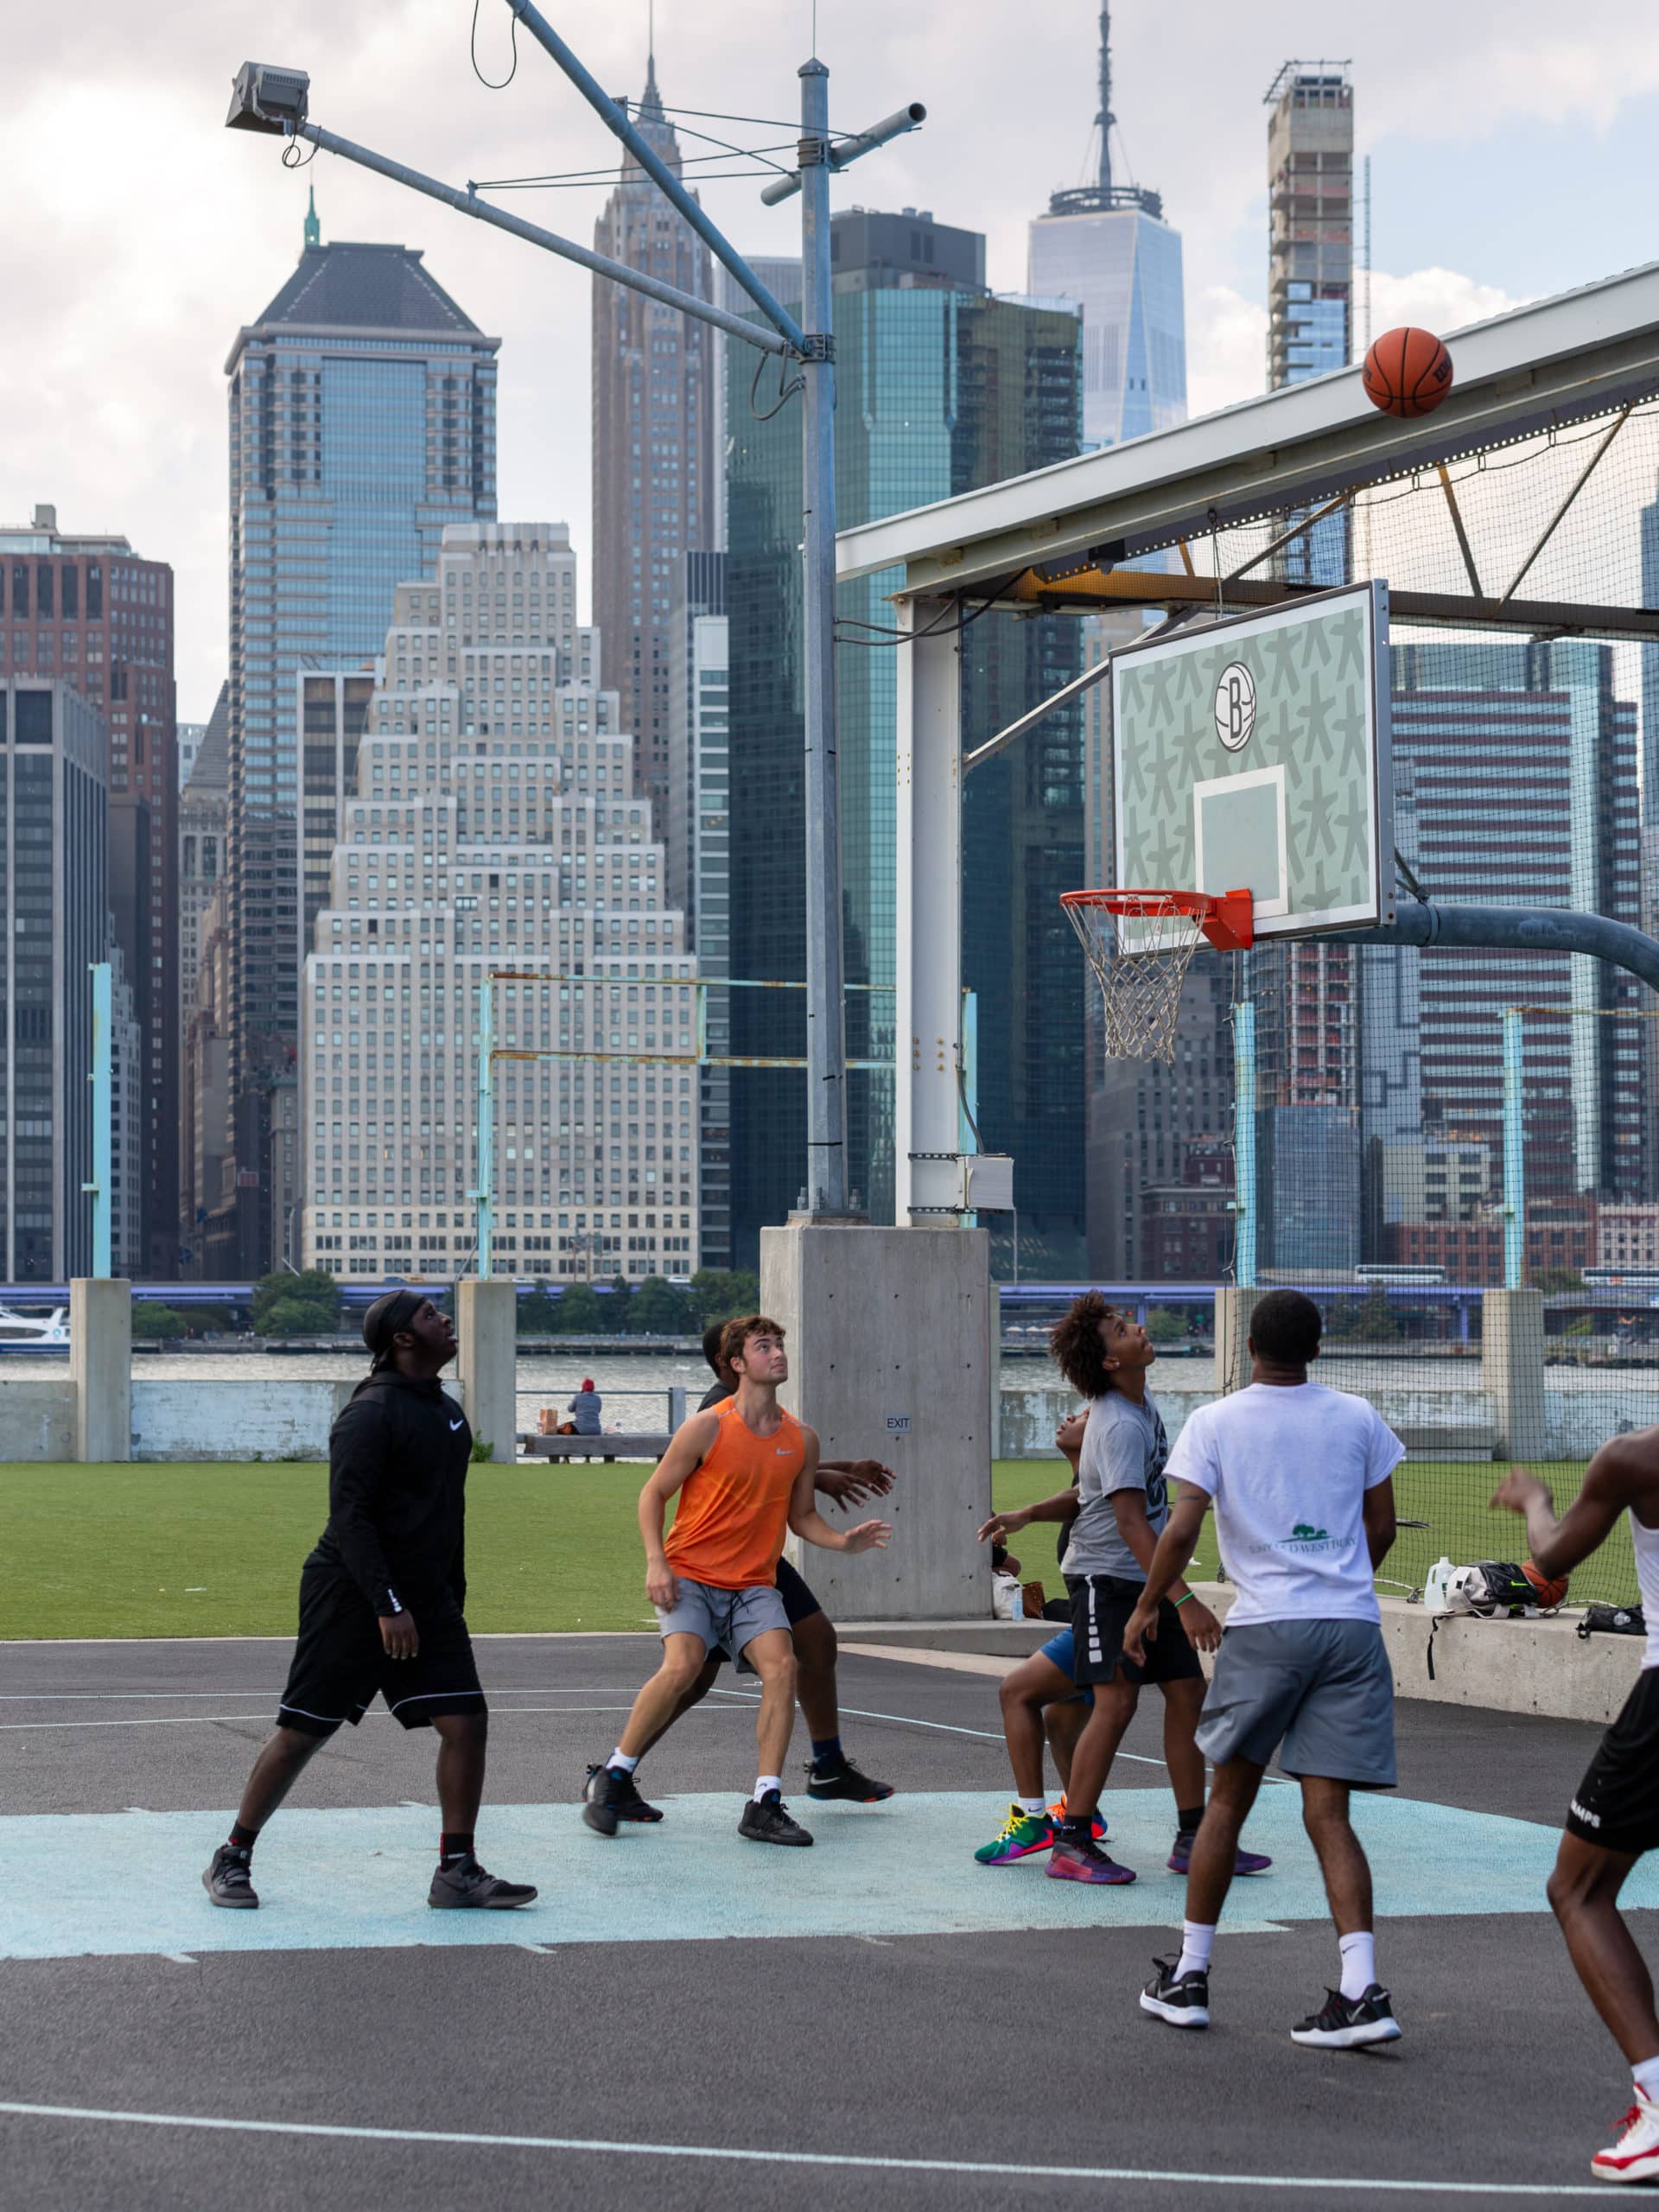 Players looking up at a basketball during a game on a court at Pier 2.